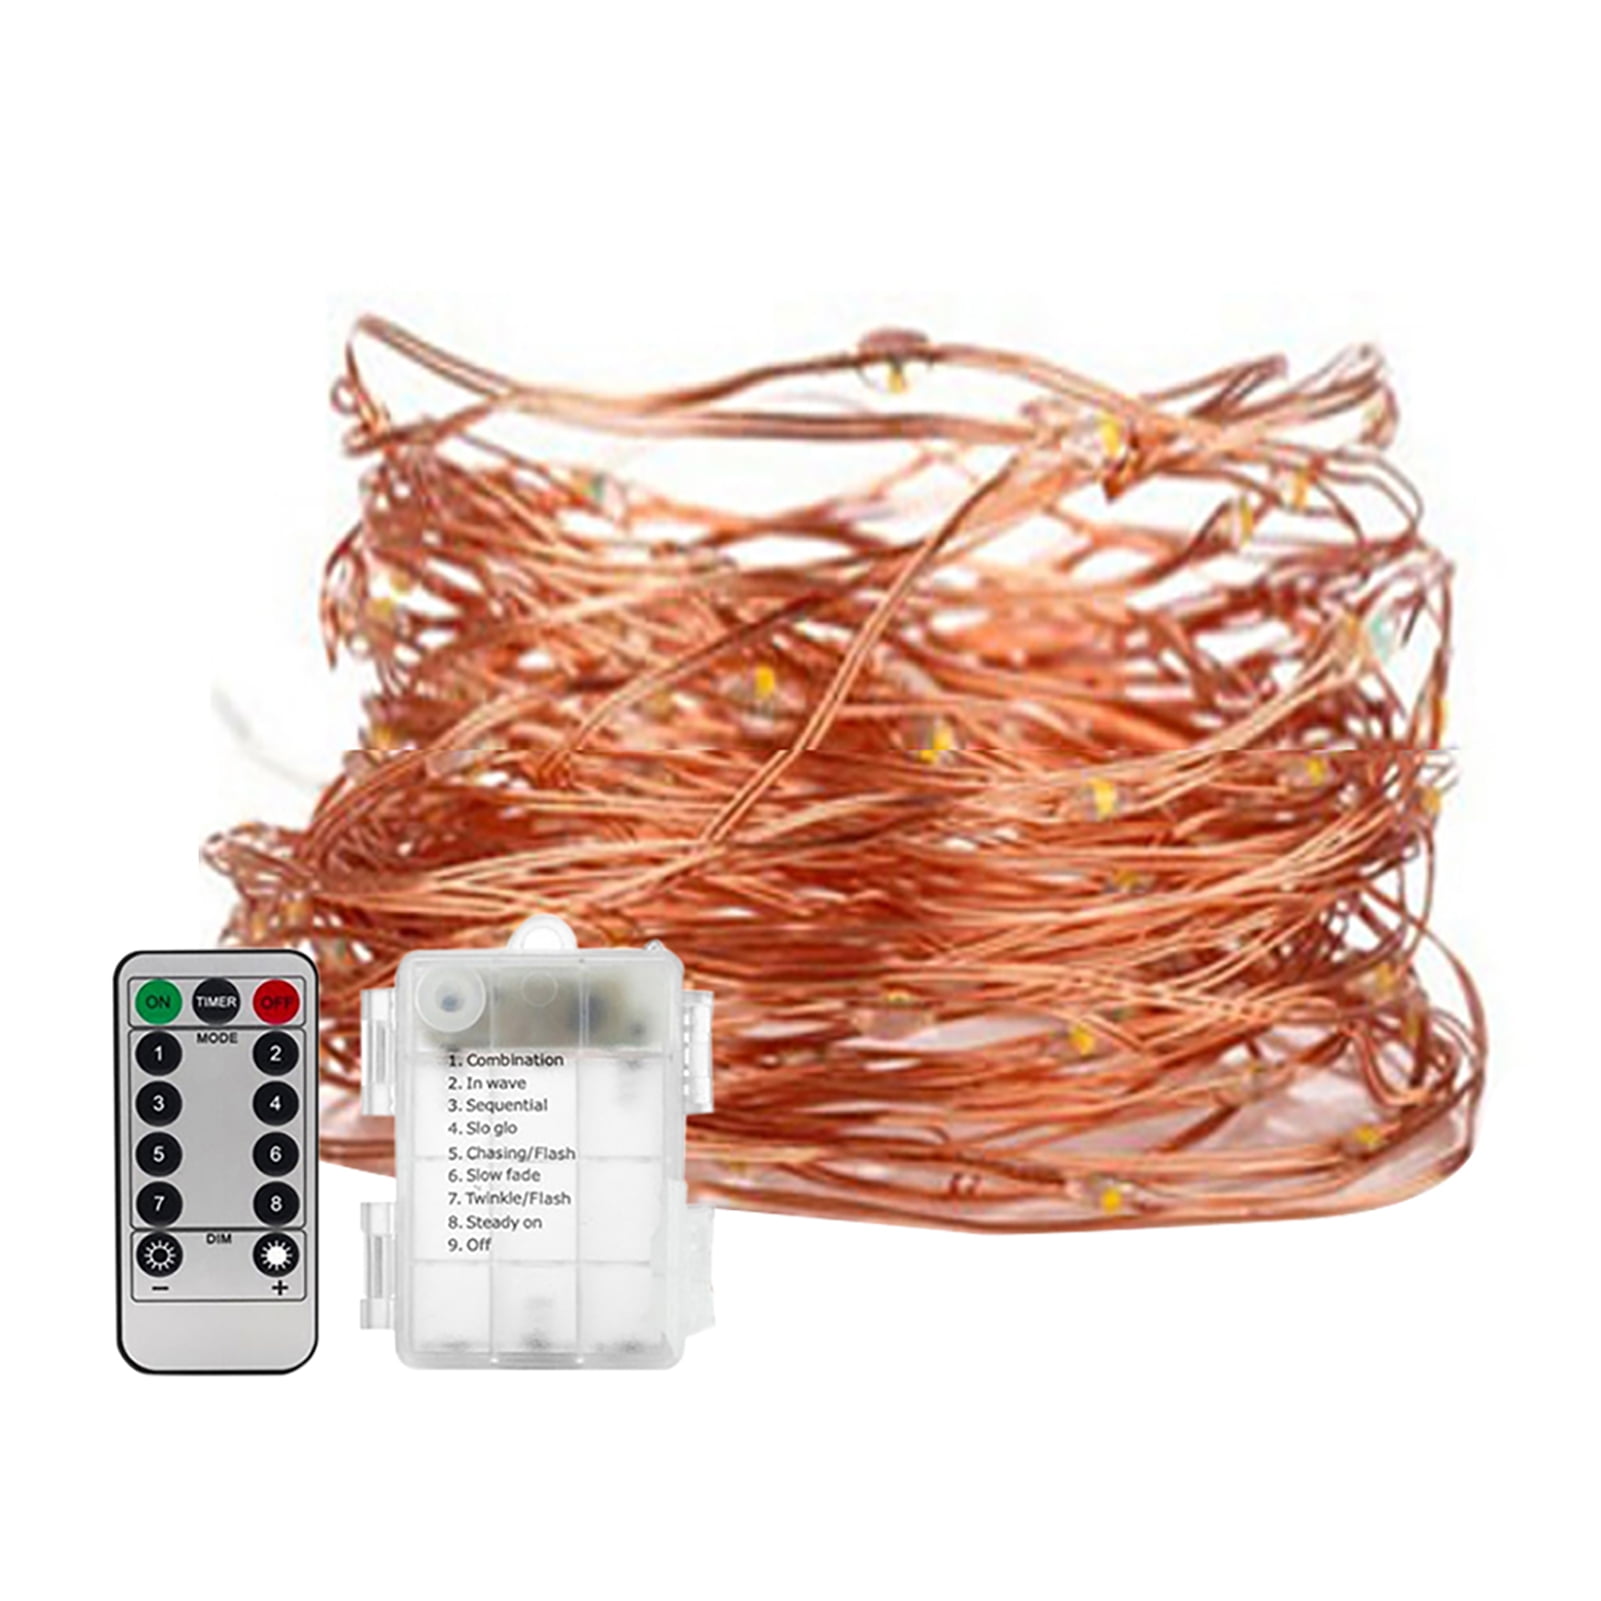 10M 100LEDs Fairy String Light USB Power Copper Wire Xmas Tree Party Garden Home 